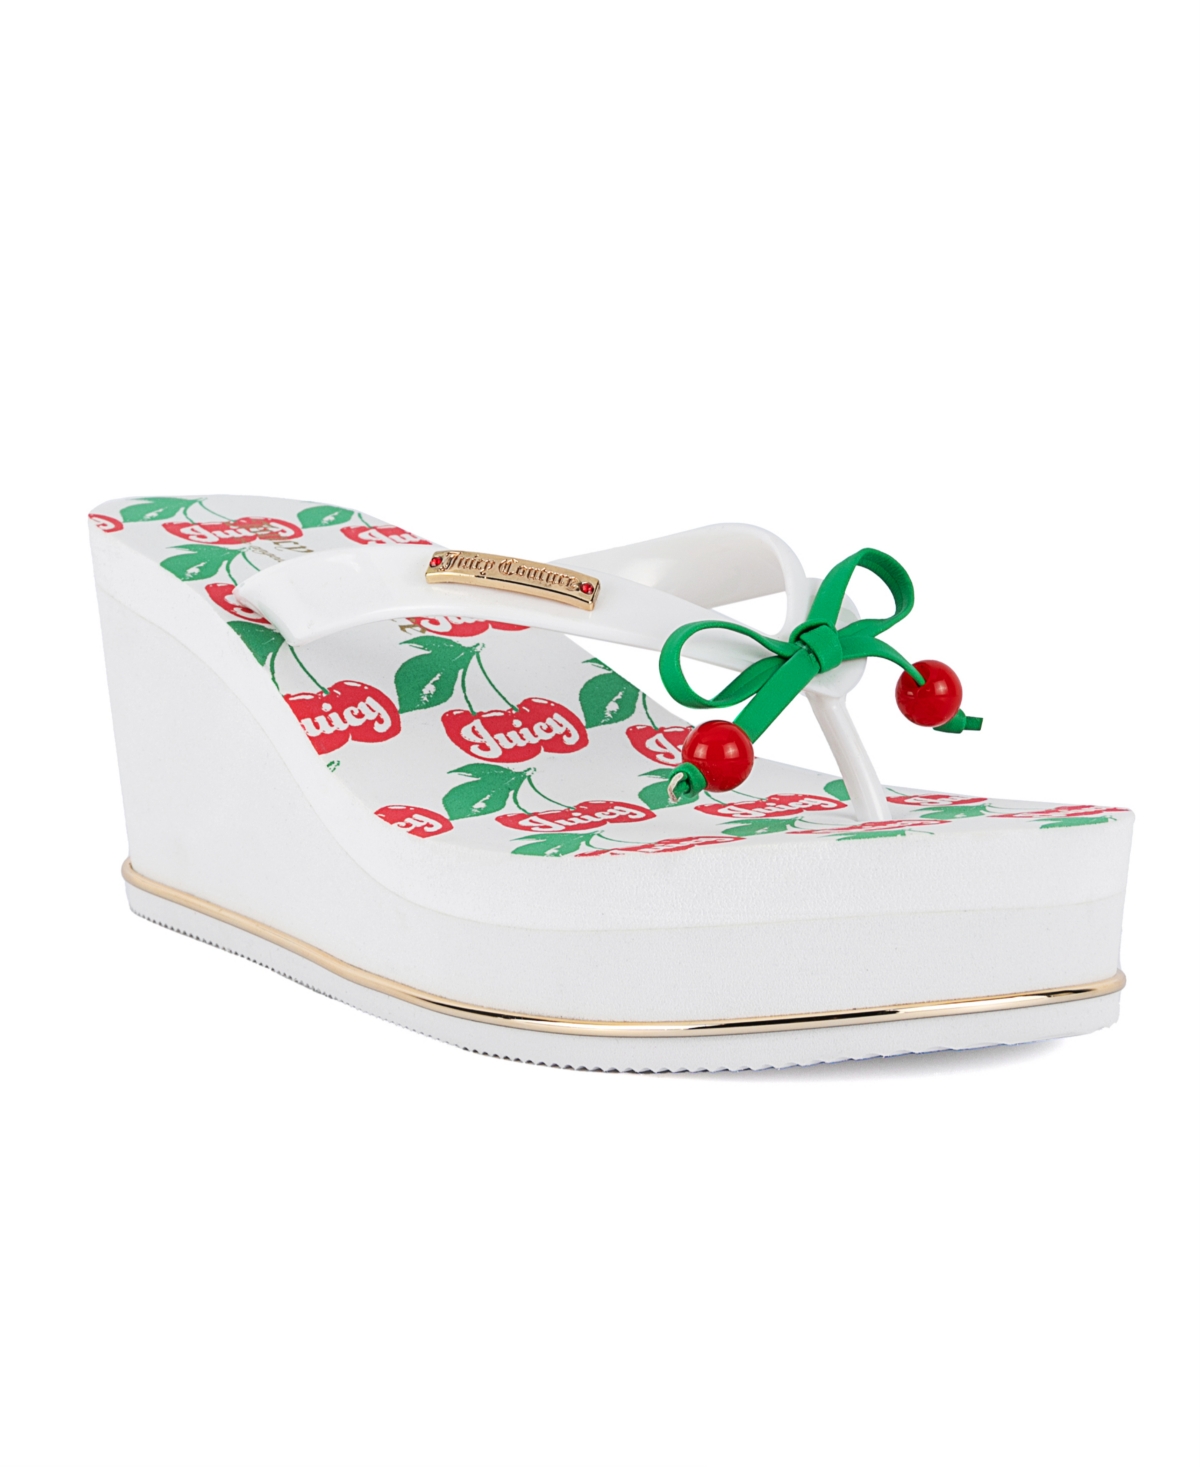 Juicy Couture Women's Umani Slip On Wedge Sandals In White Multi